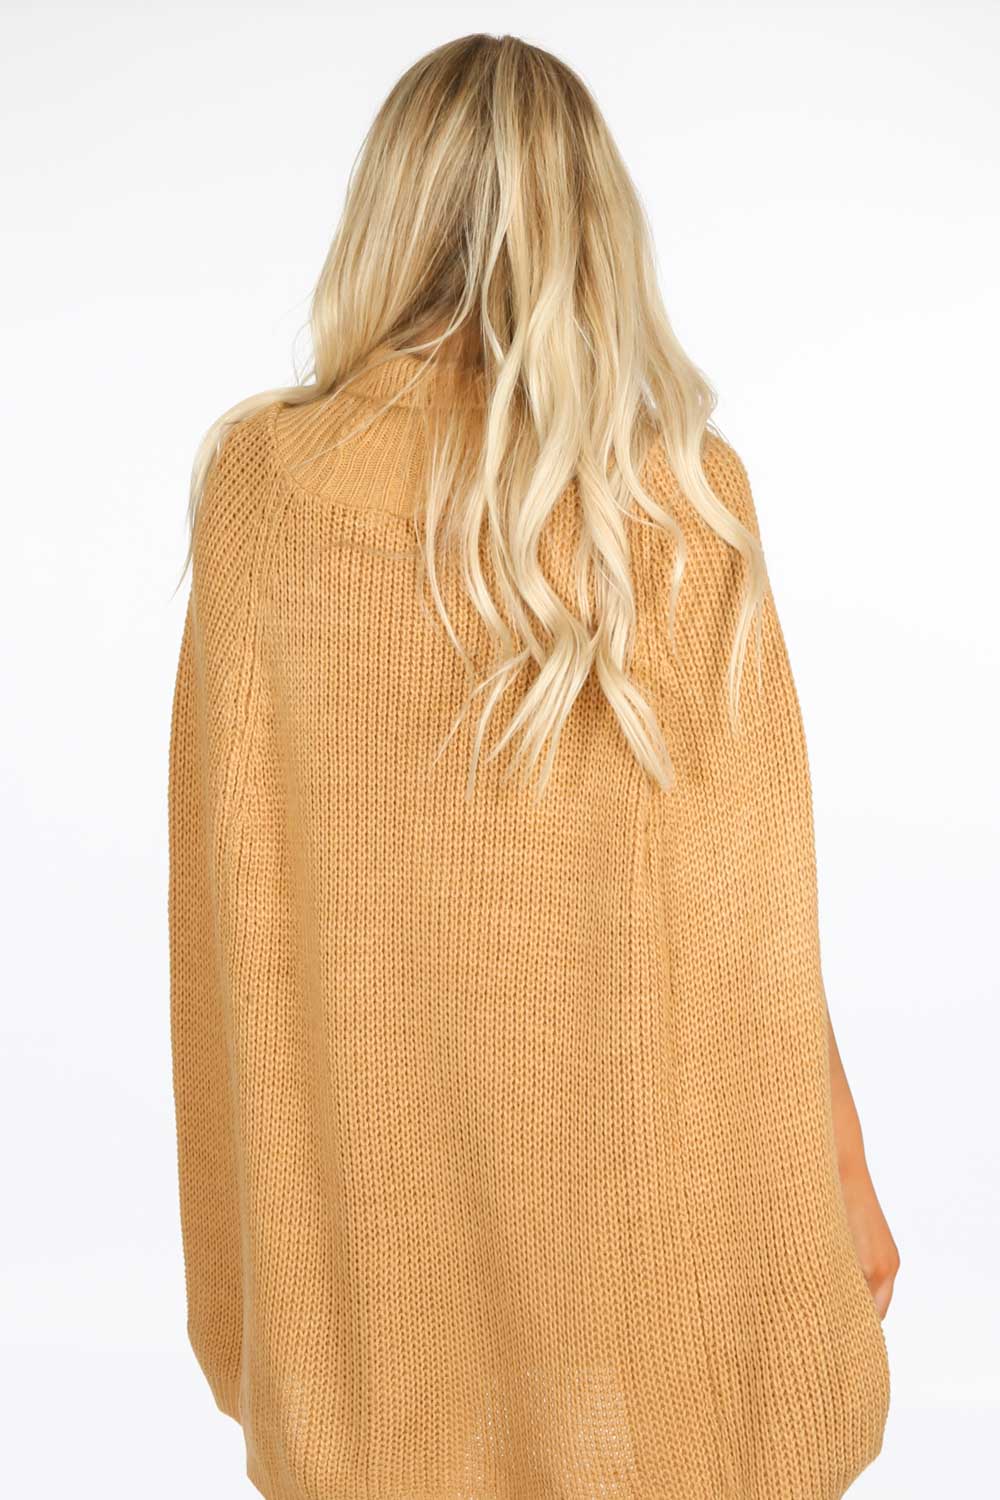 Camel Knitted Poncho Dress